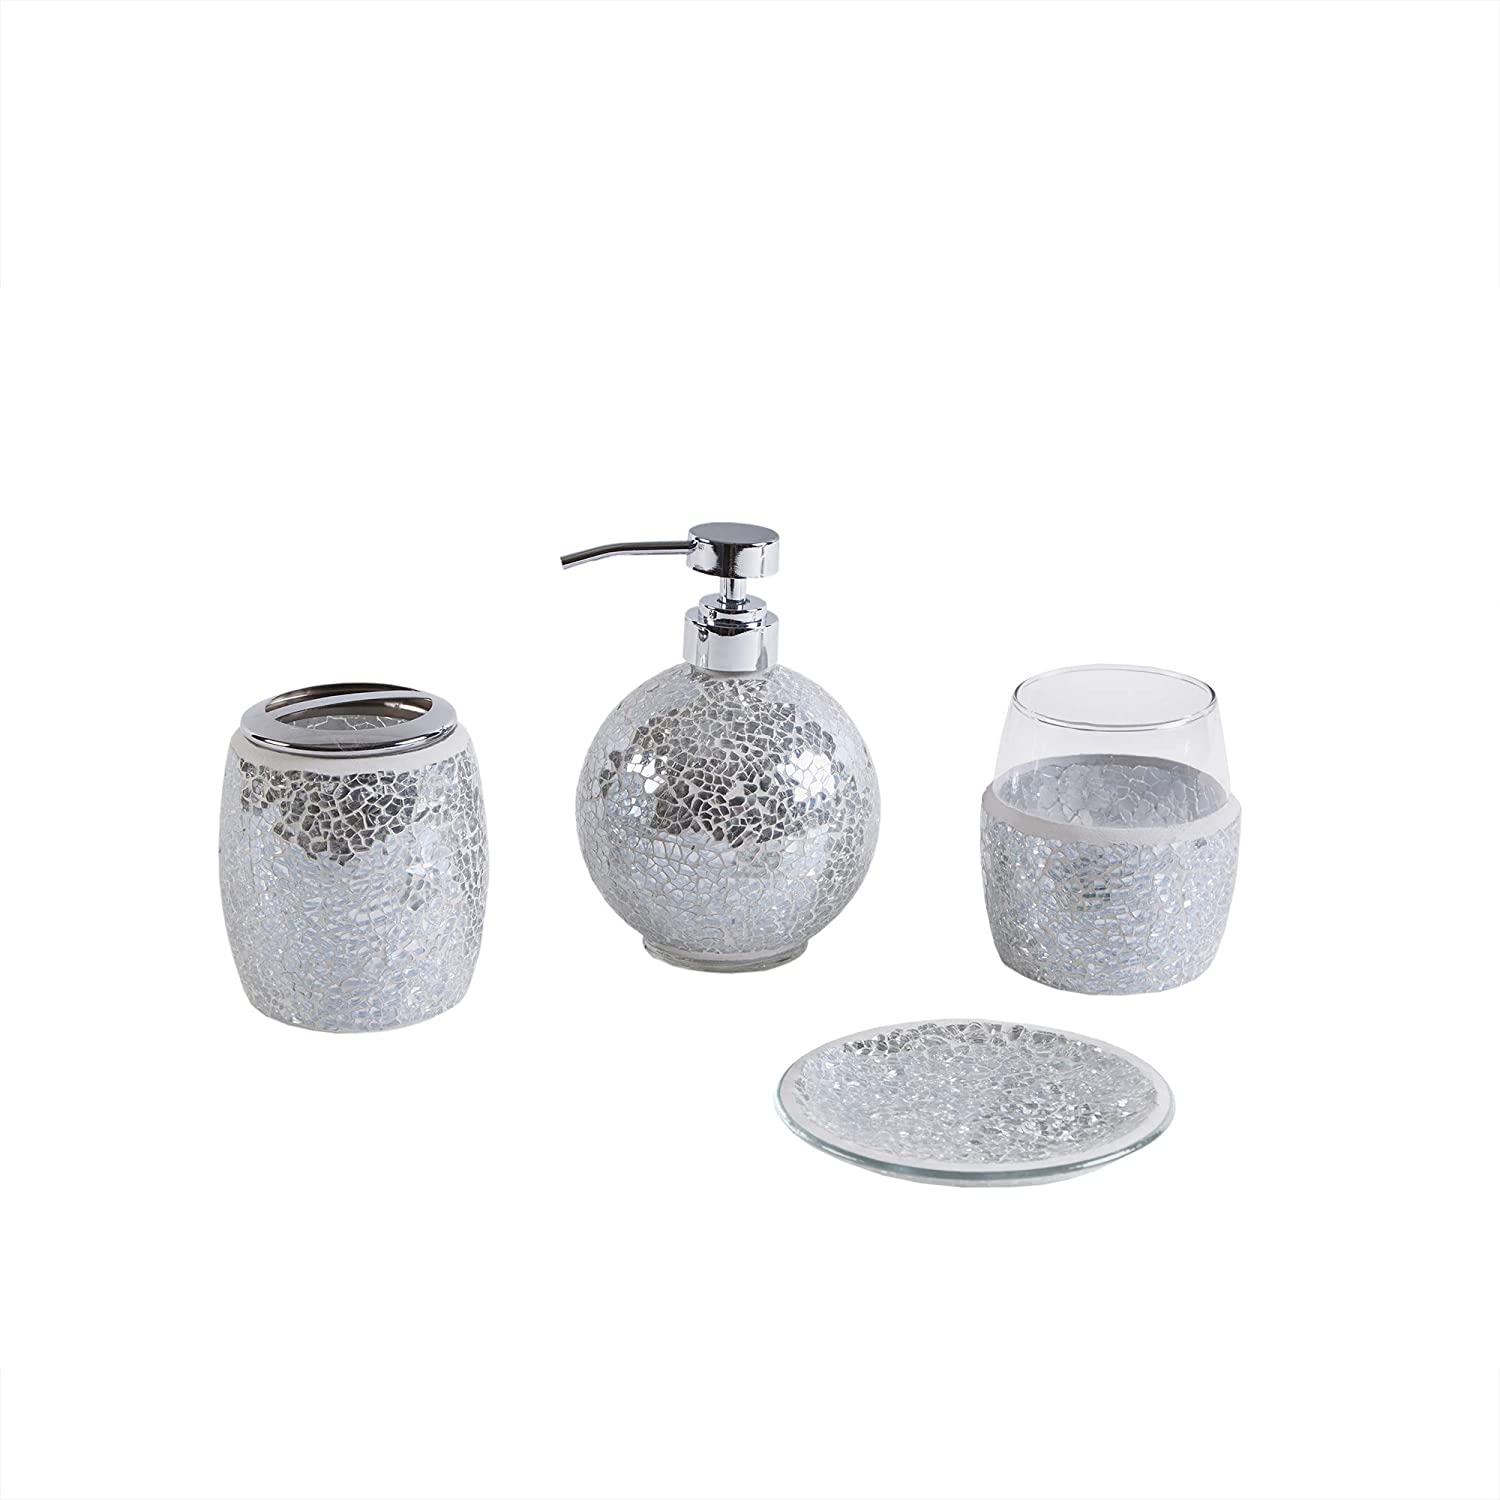 Mosaic Bathroom Accessories Set , 4 Piece Bath Accessory Sets With Silver Soap Dispenser , Toothbrush Holder , Tumbler And Ring Tray